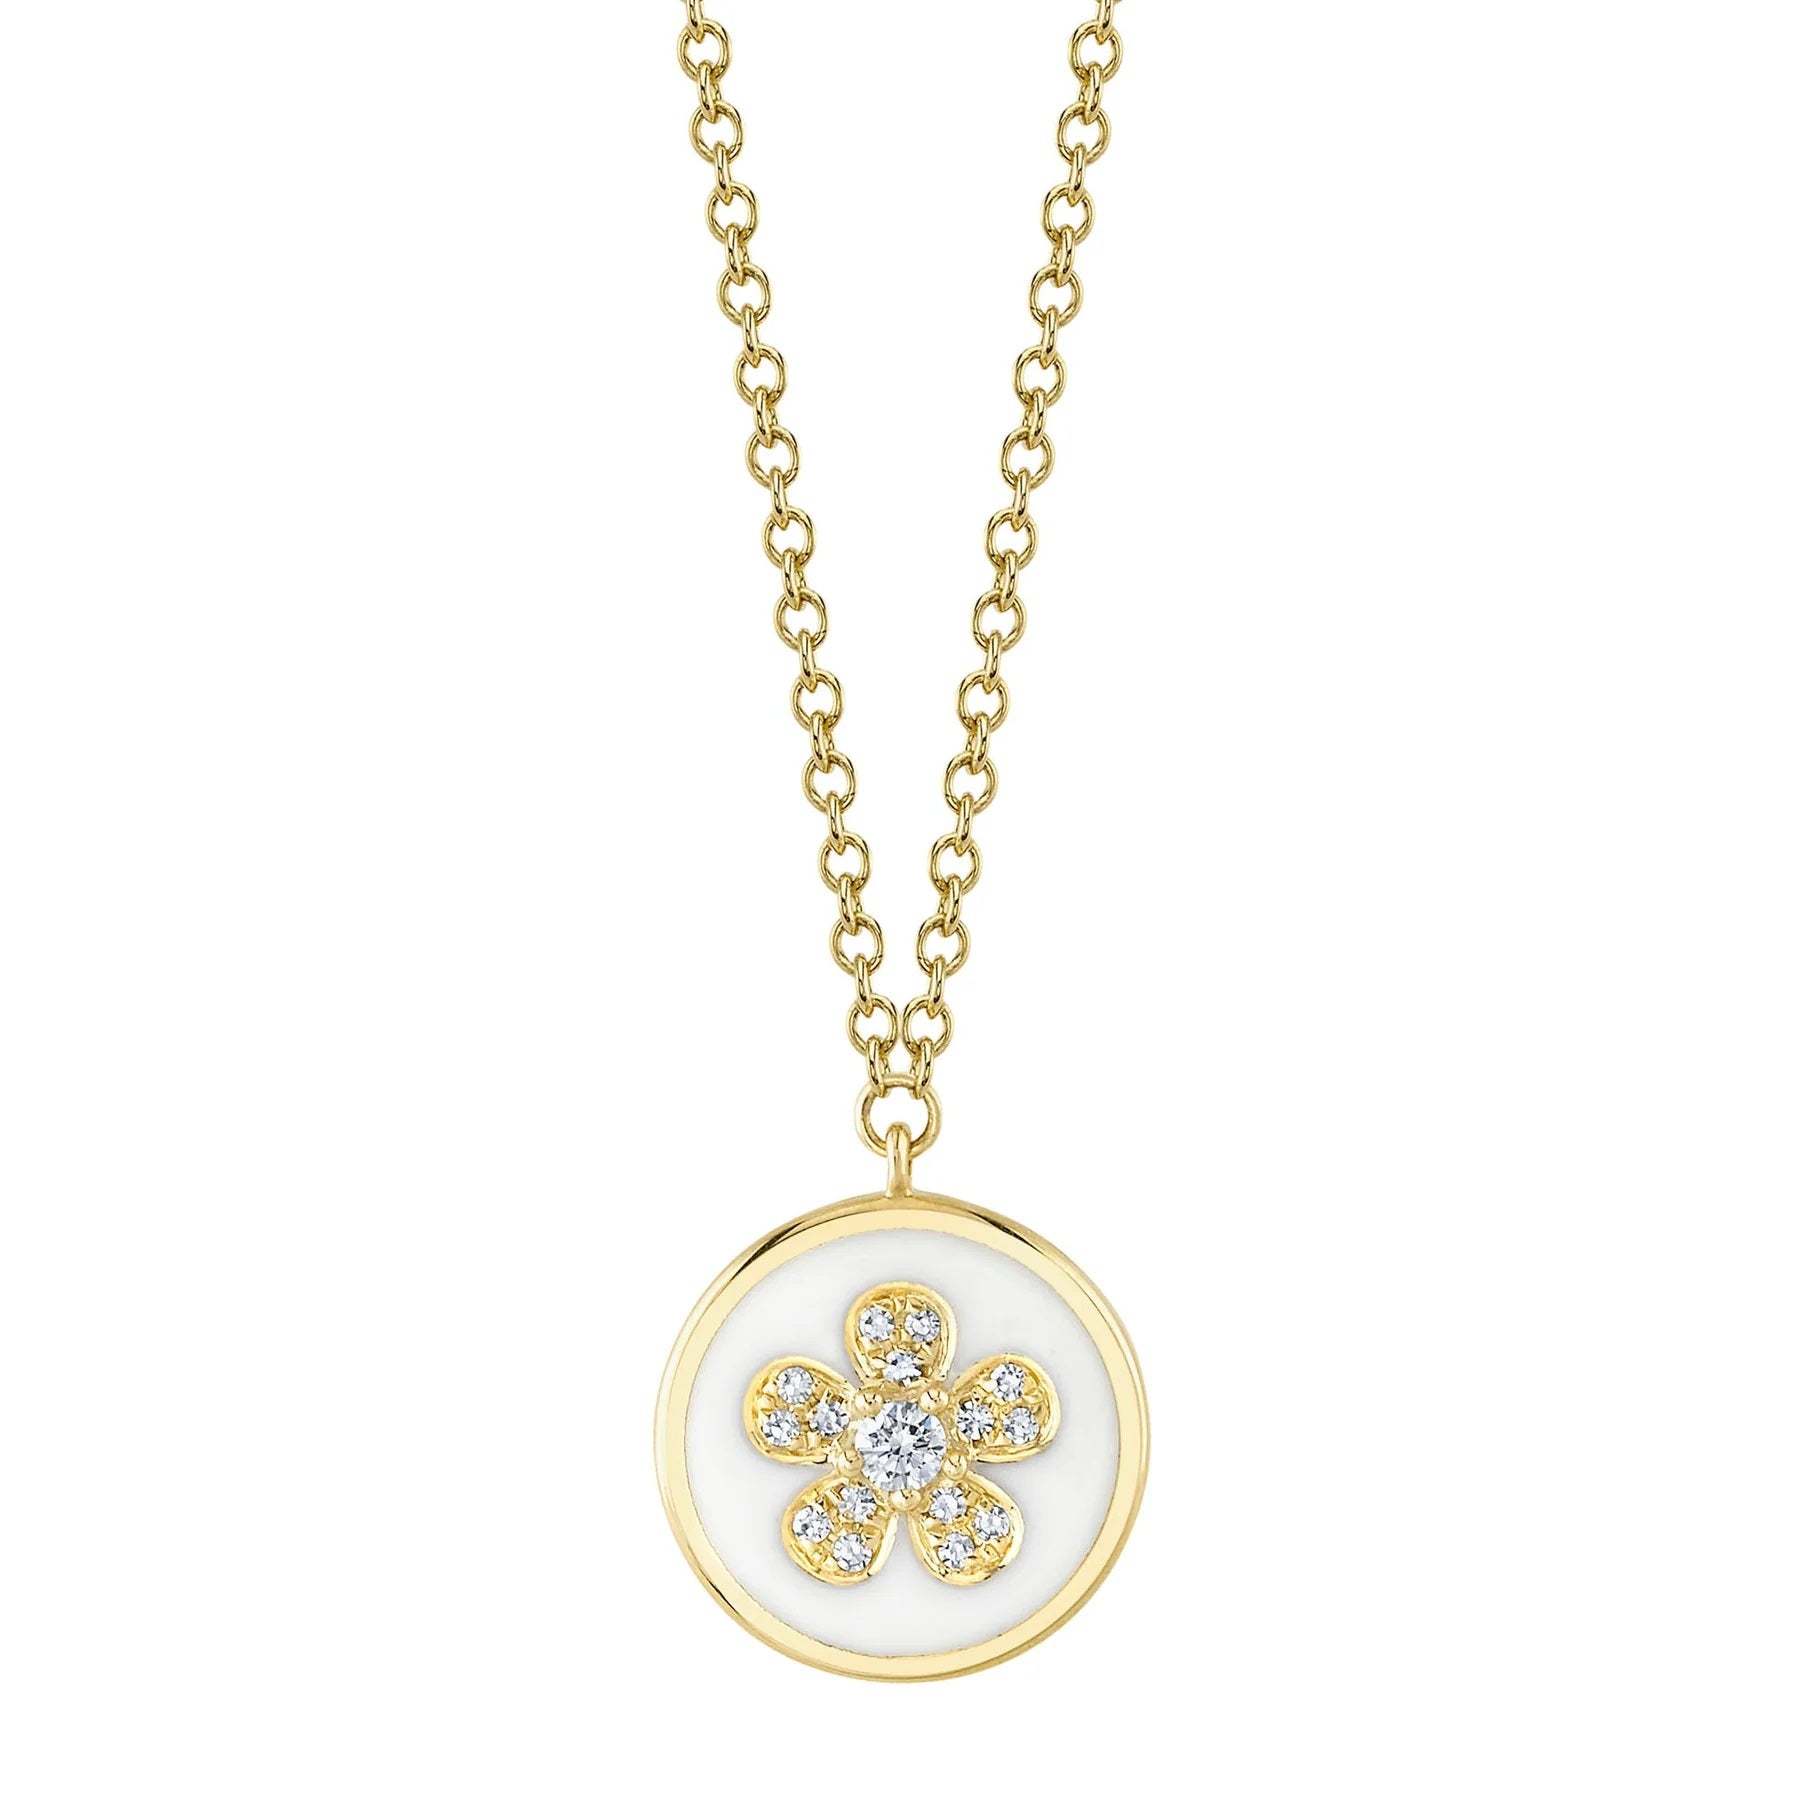 14K YELLOW GOLD ENAMEL AND DIAMOND FLOWER NECKLACE